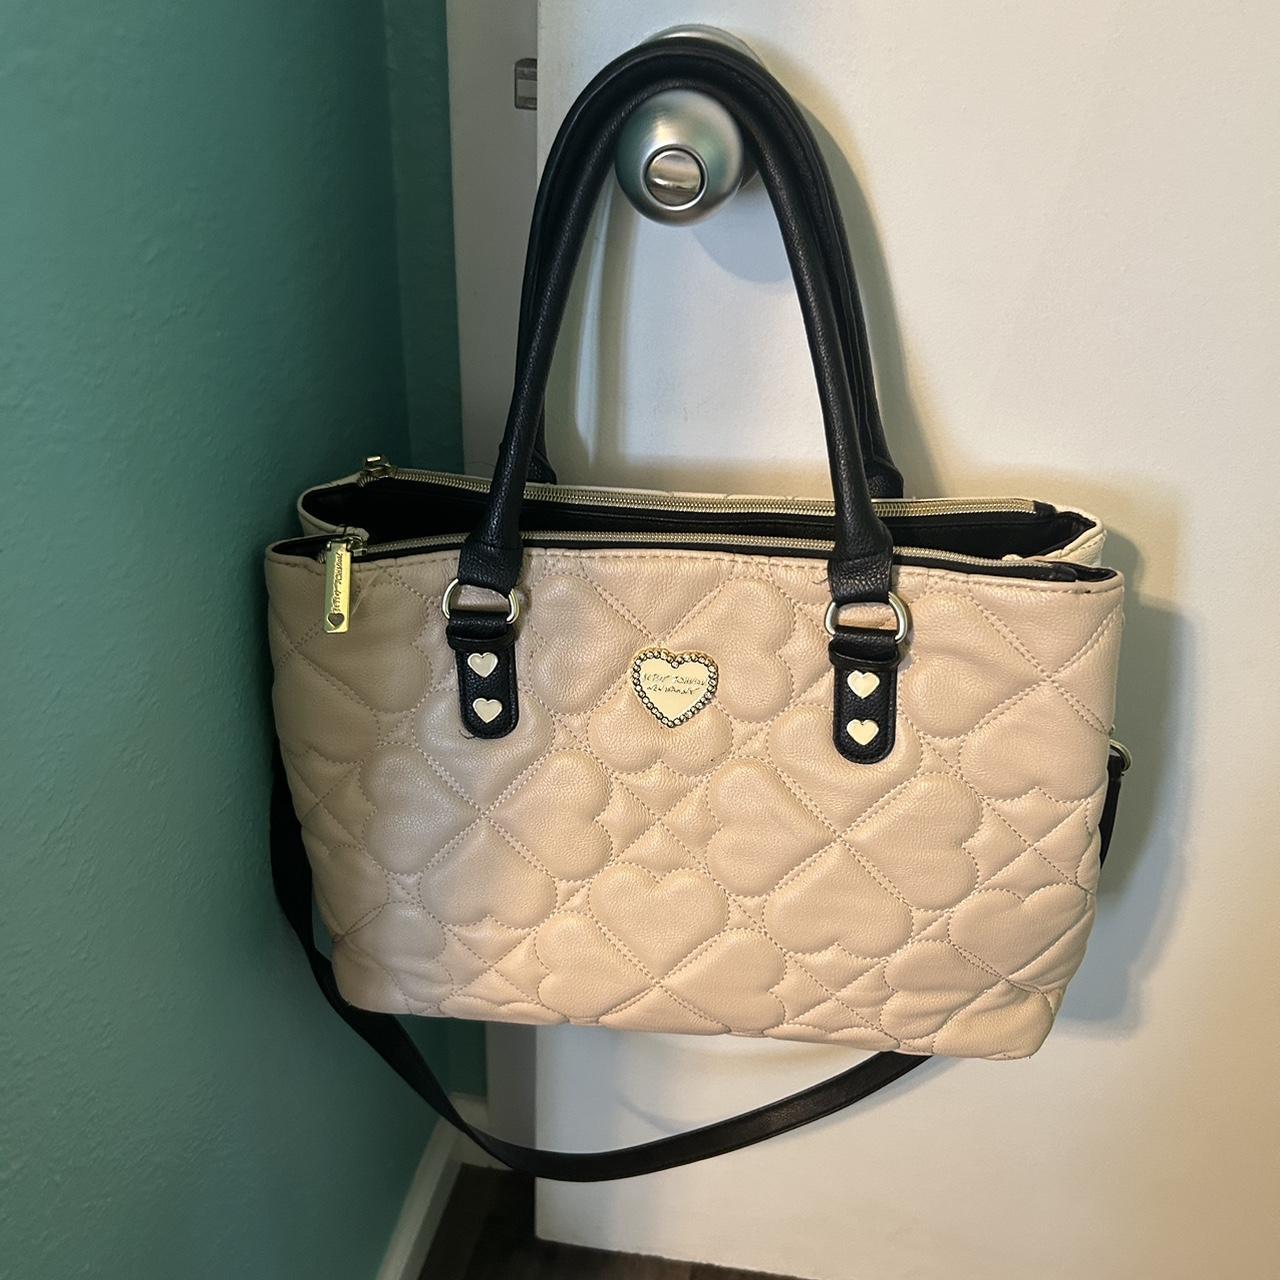 Betsey Johnson Be Mine Black Quilted Hearts Barrel Purse - Bags & Luggage -  Mooresville, Indiana | Facebook Marketplace | Facebook